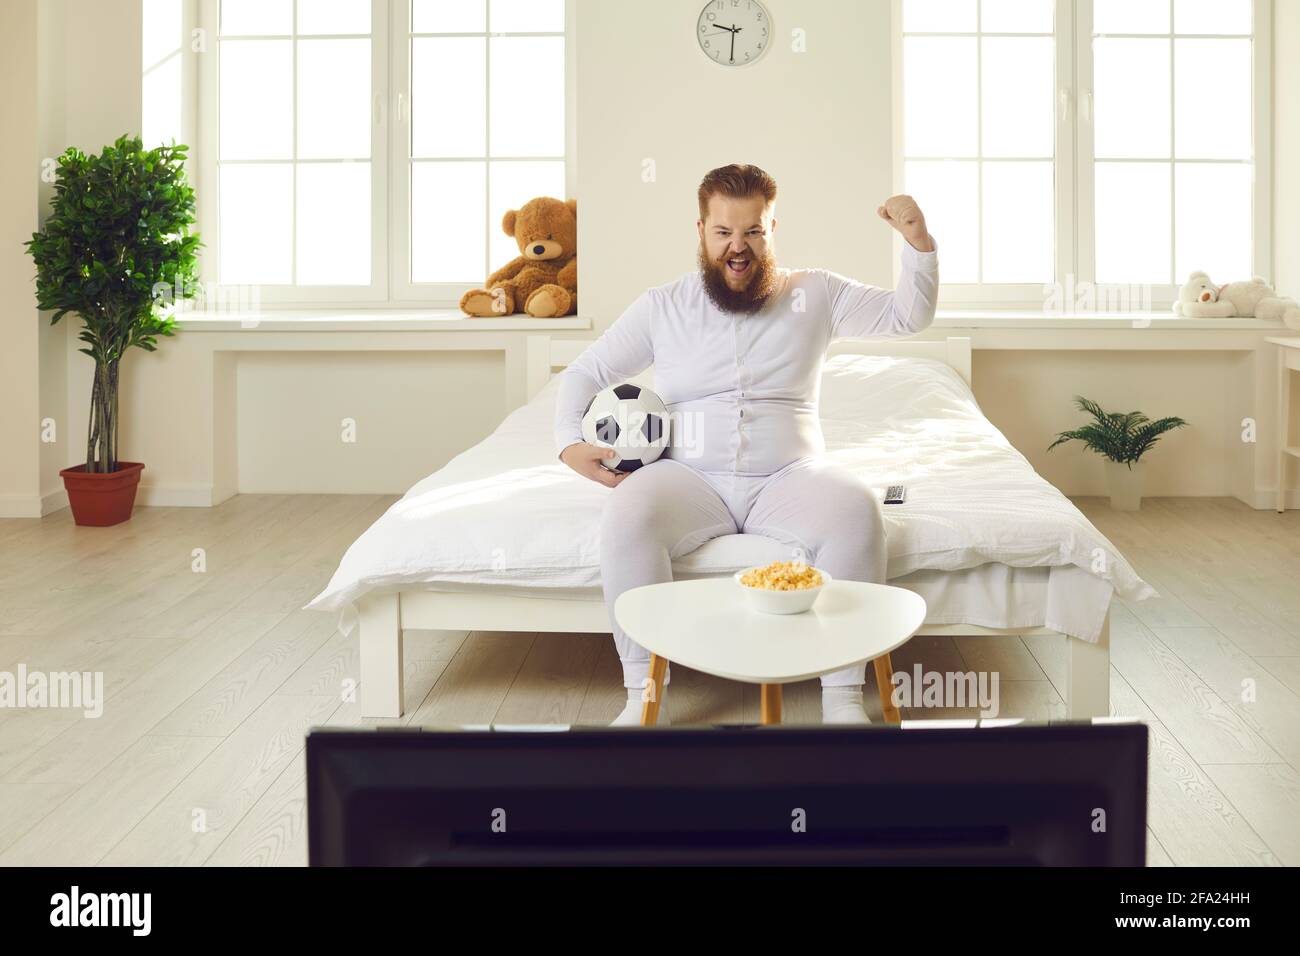 Fat Man Bed High Resolution Stock Photography and Images - Alamy